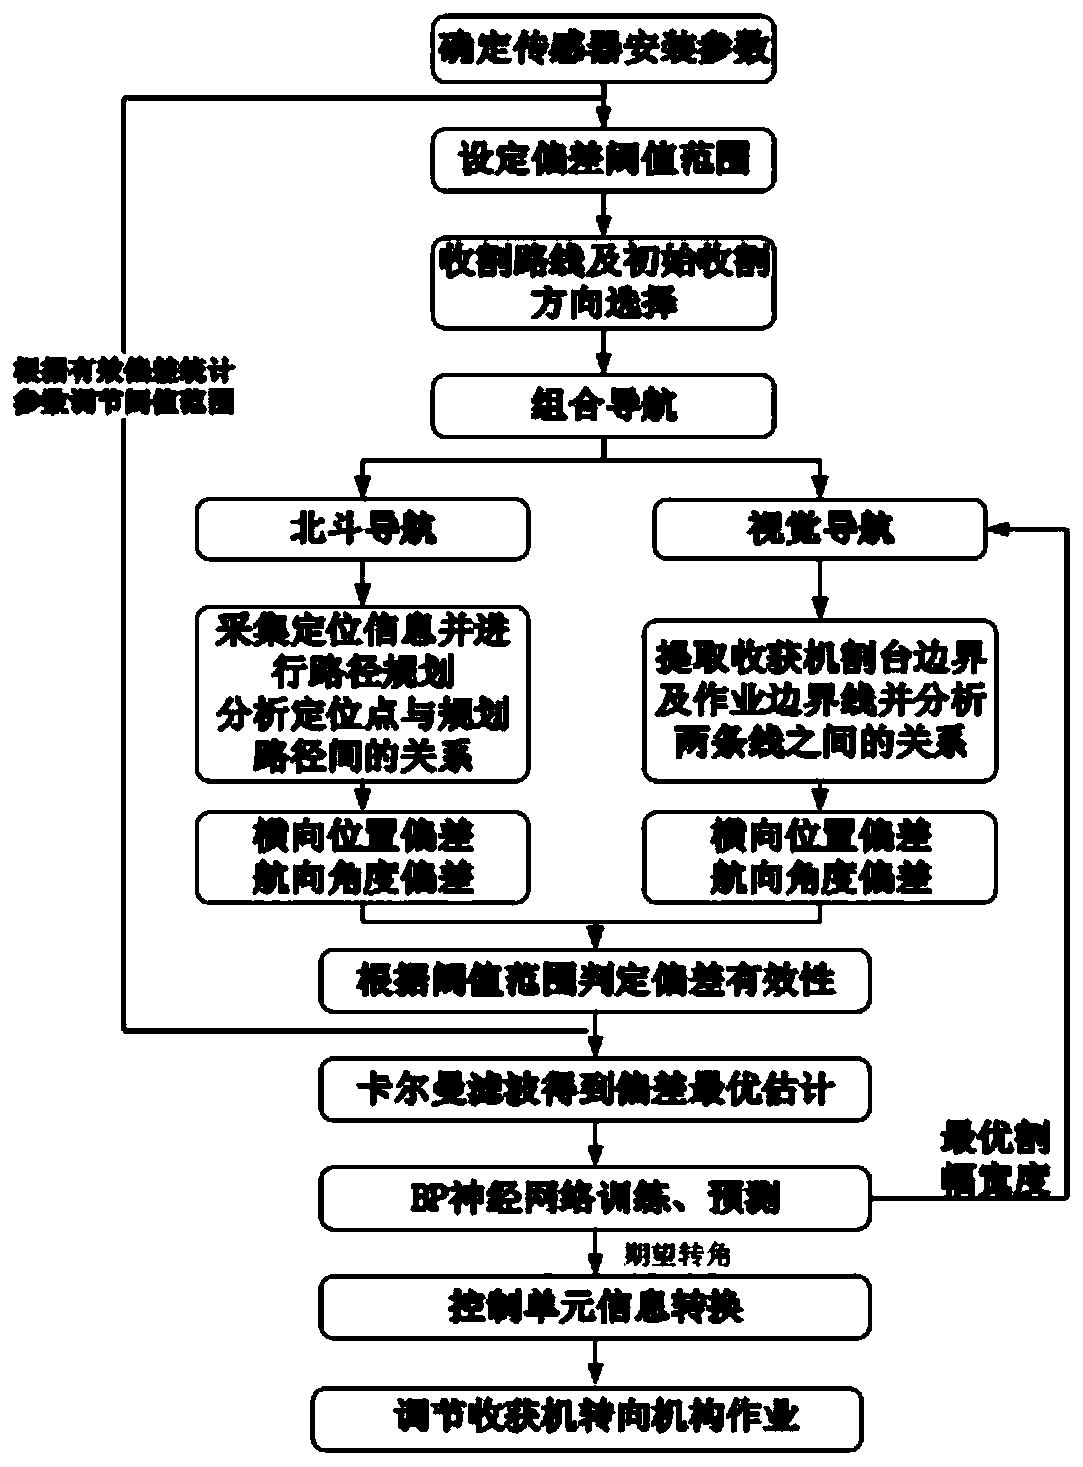 Integrated navigation method and navigation system of combined harvester based on Beidou and vision